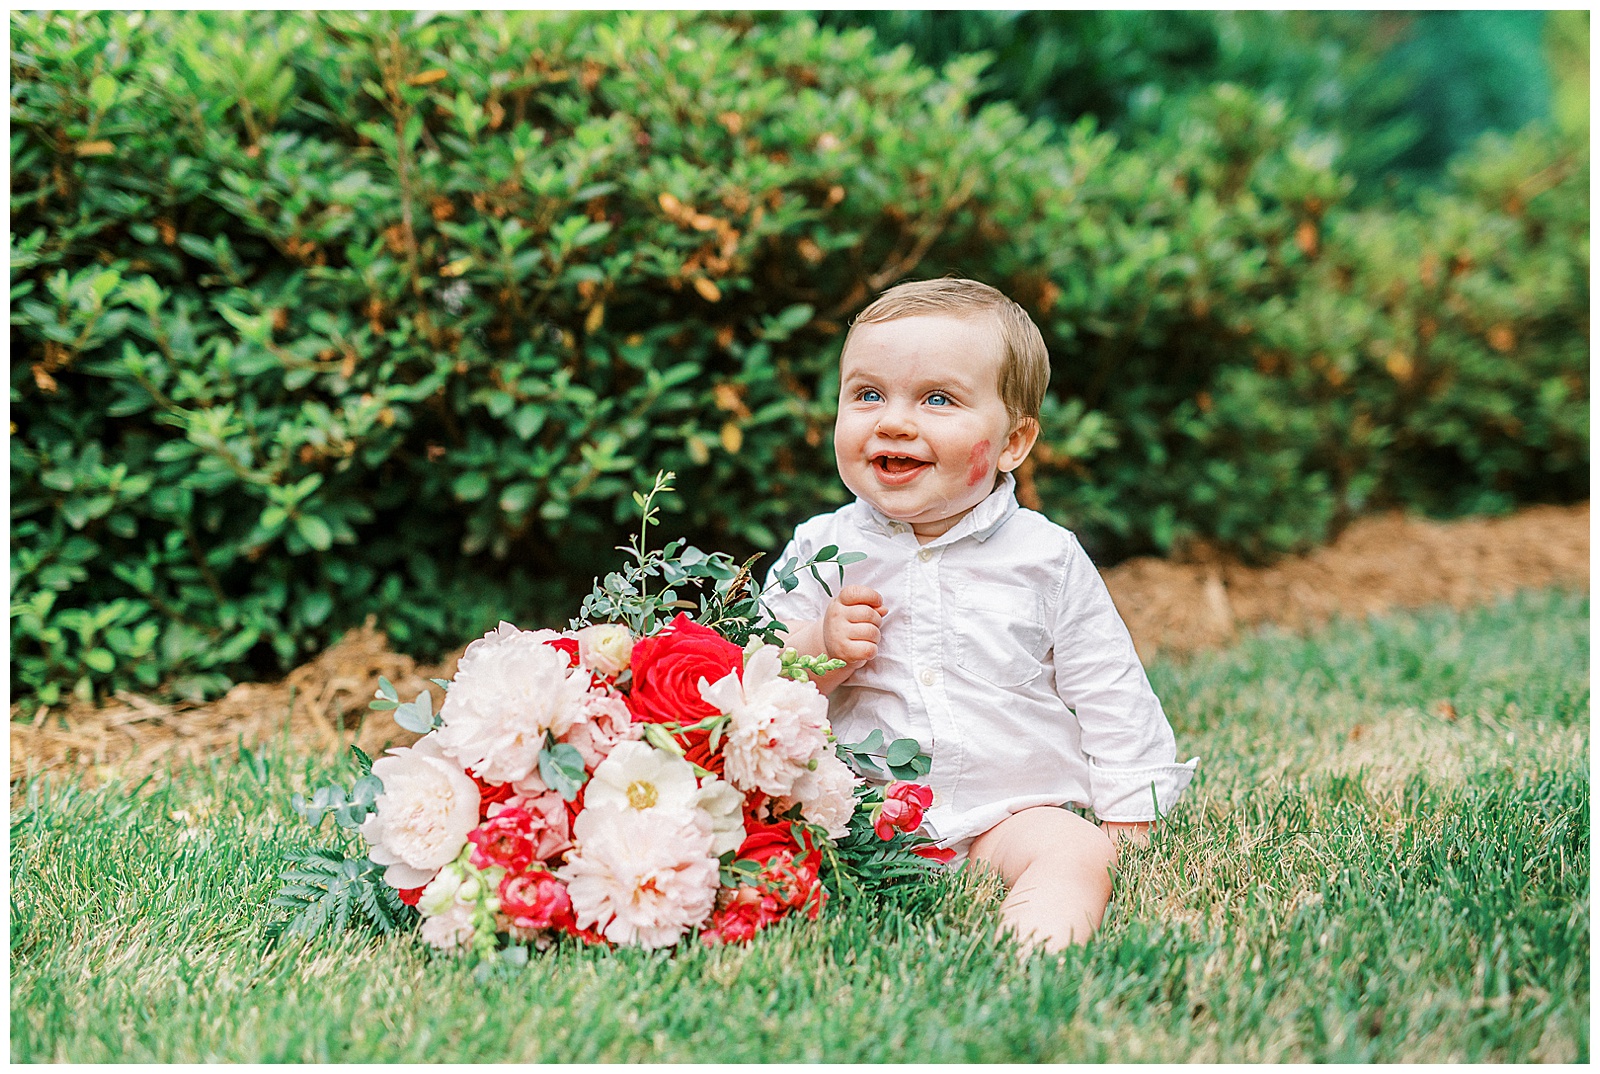 adorable baby son of bride poses with red and white bouquet and lipstick kiss on cheek outdoor portrait in the grass